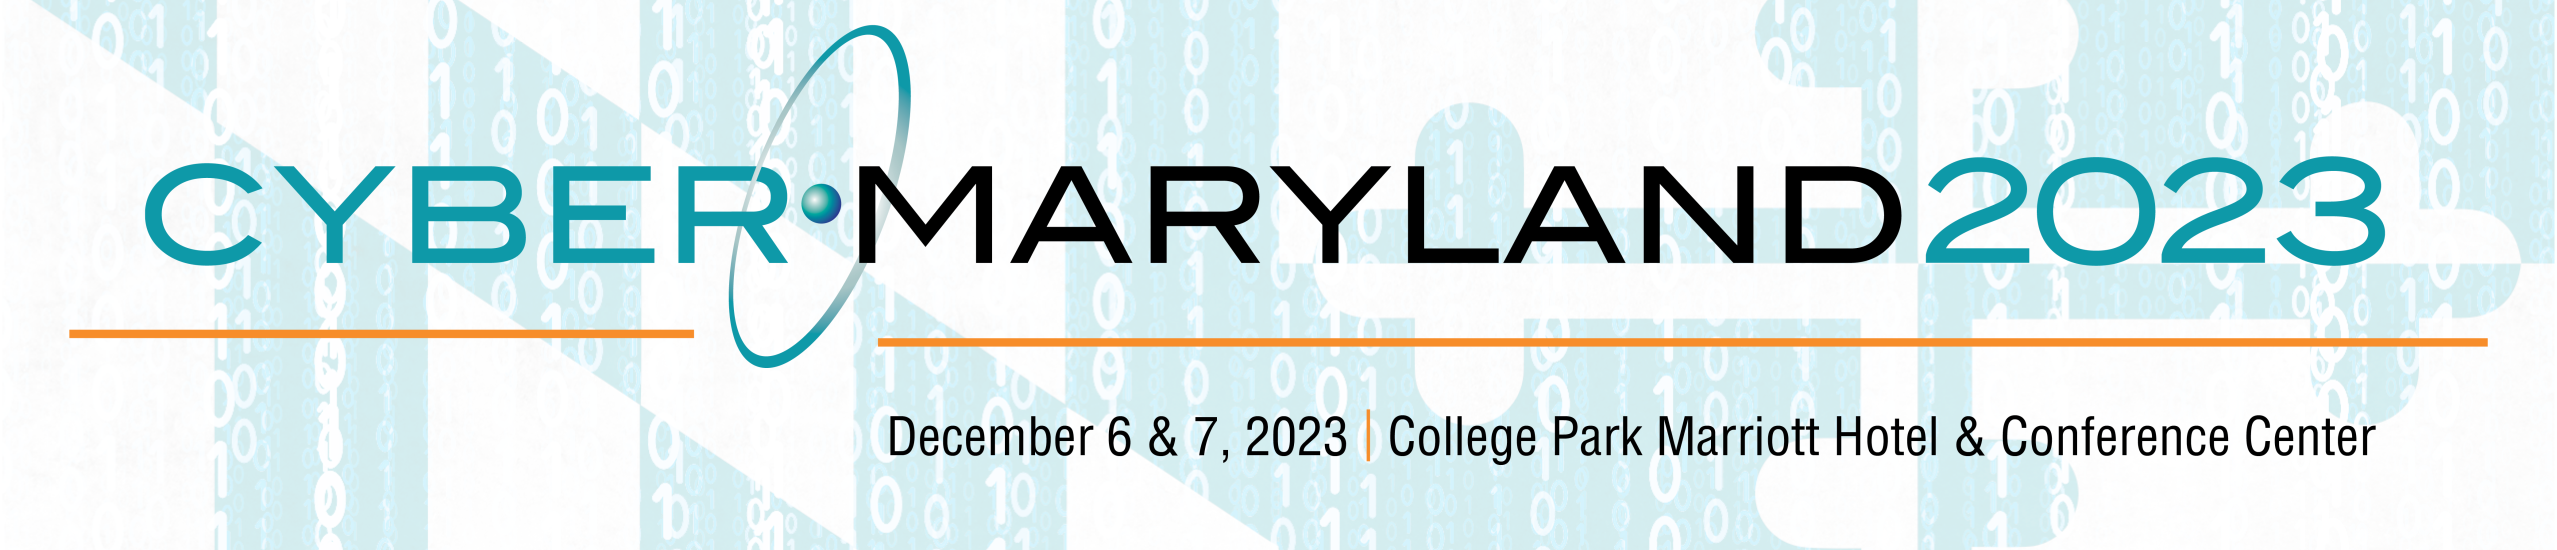 2023 CyberMaryland Conference